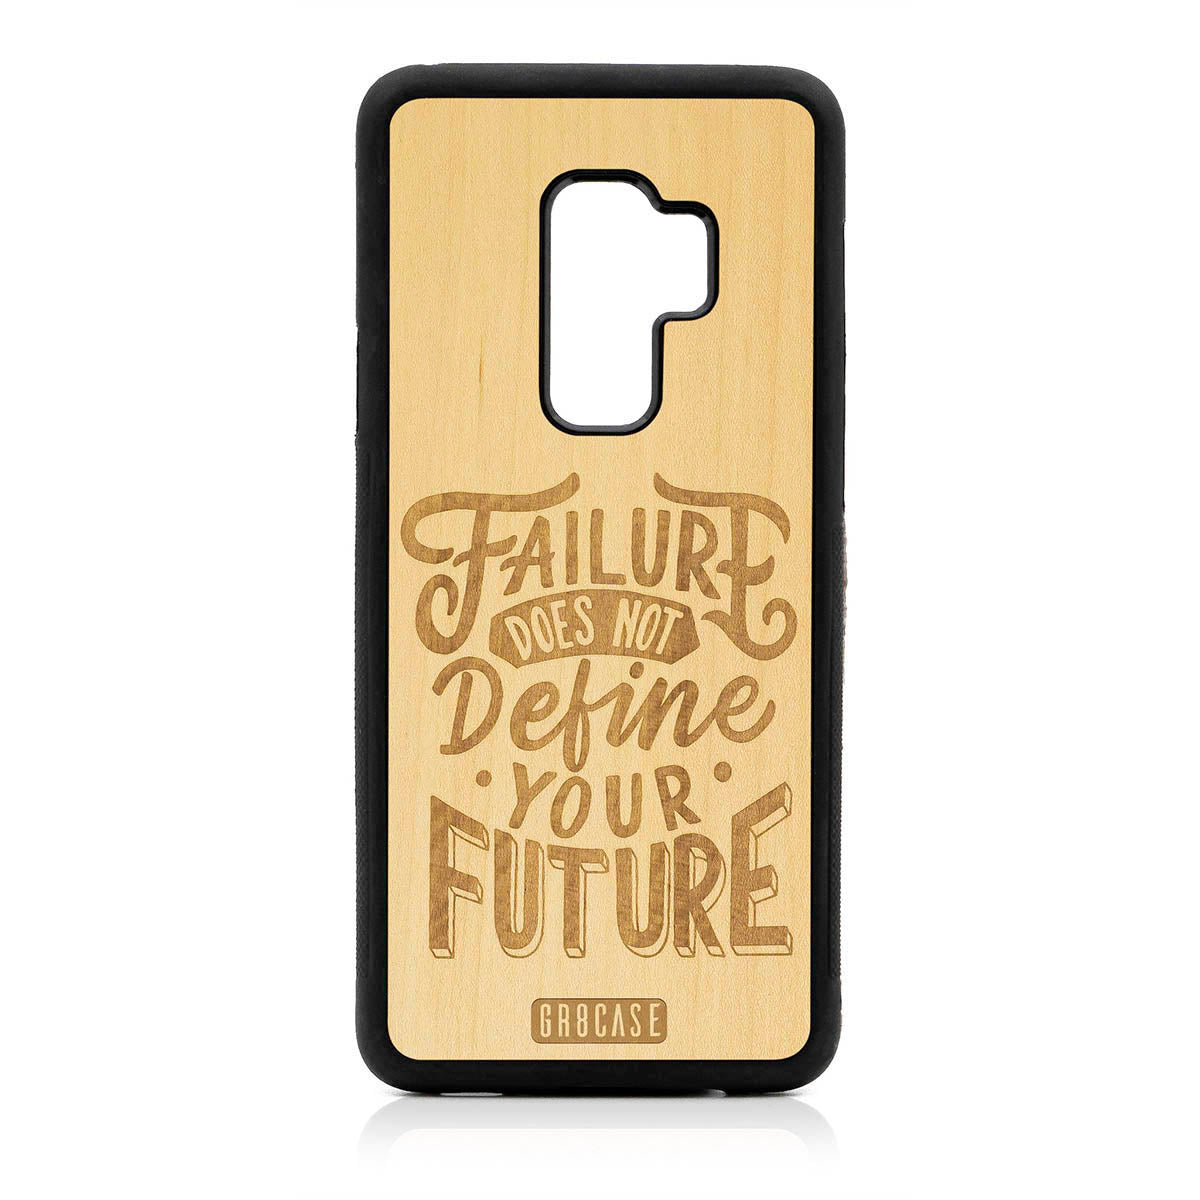 Failure Does Not Define You Future Design Wood Case For Samsung Galaxy S9 Plus by GR8CASE